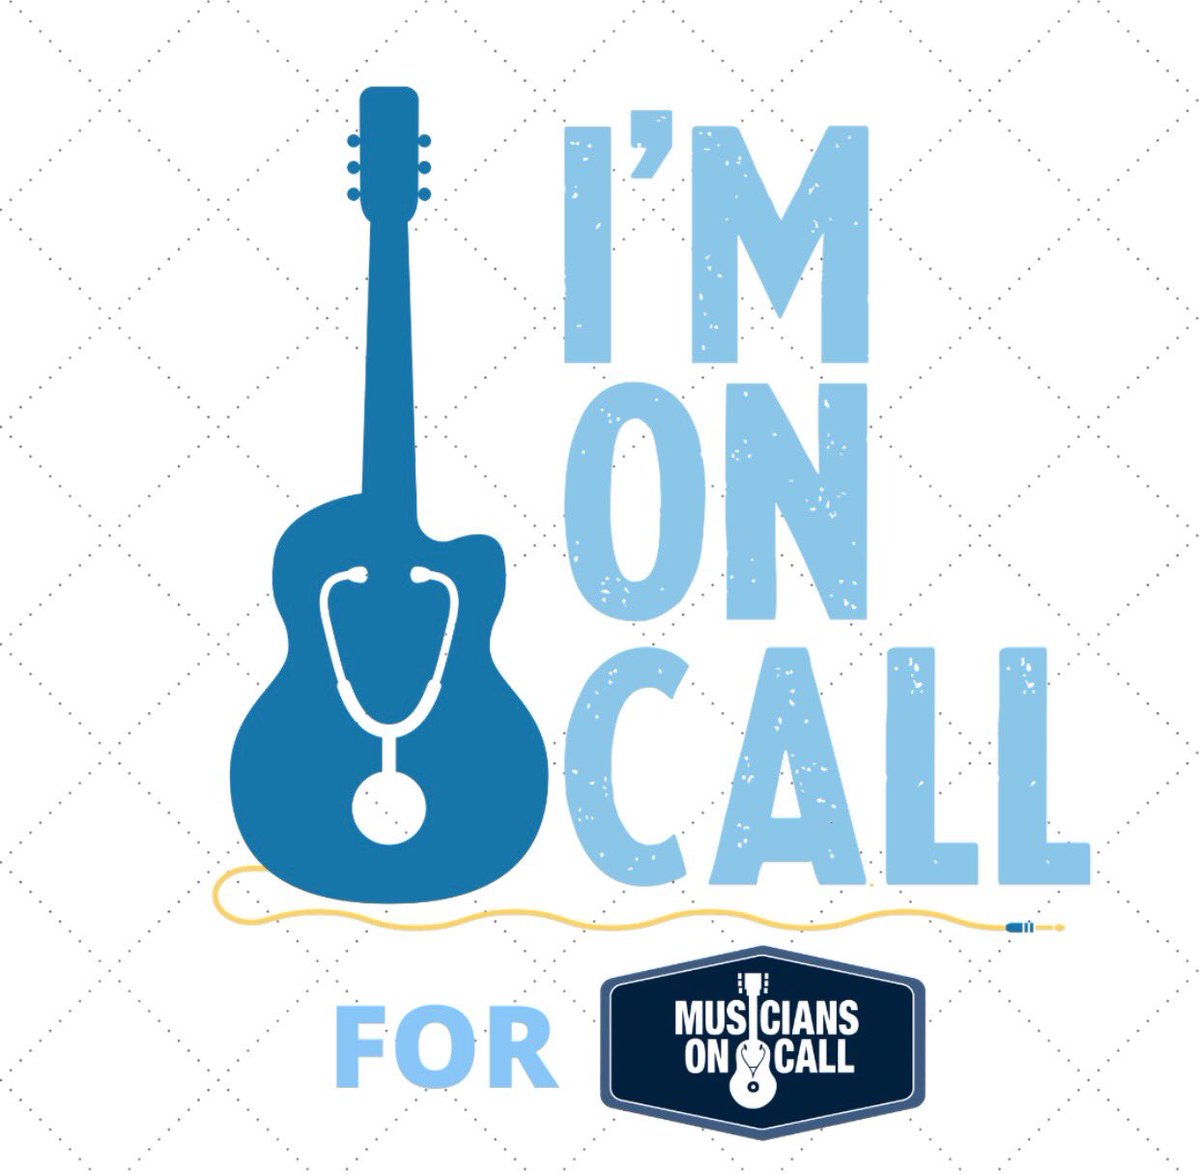 Today is Giving Tuesday! I am honored to be a volunteer with @musiciansoncall ! I can’t wait to get back to bedside volunteering! #givingtuesday #musiciansoncall #volunteer #musicheals